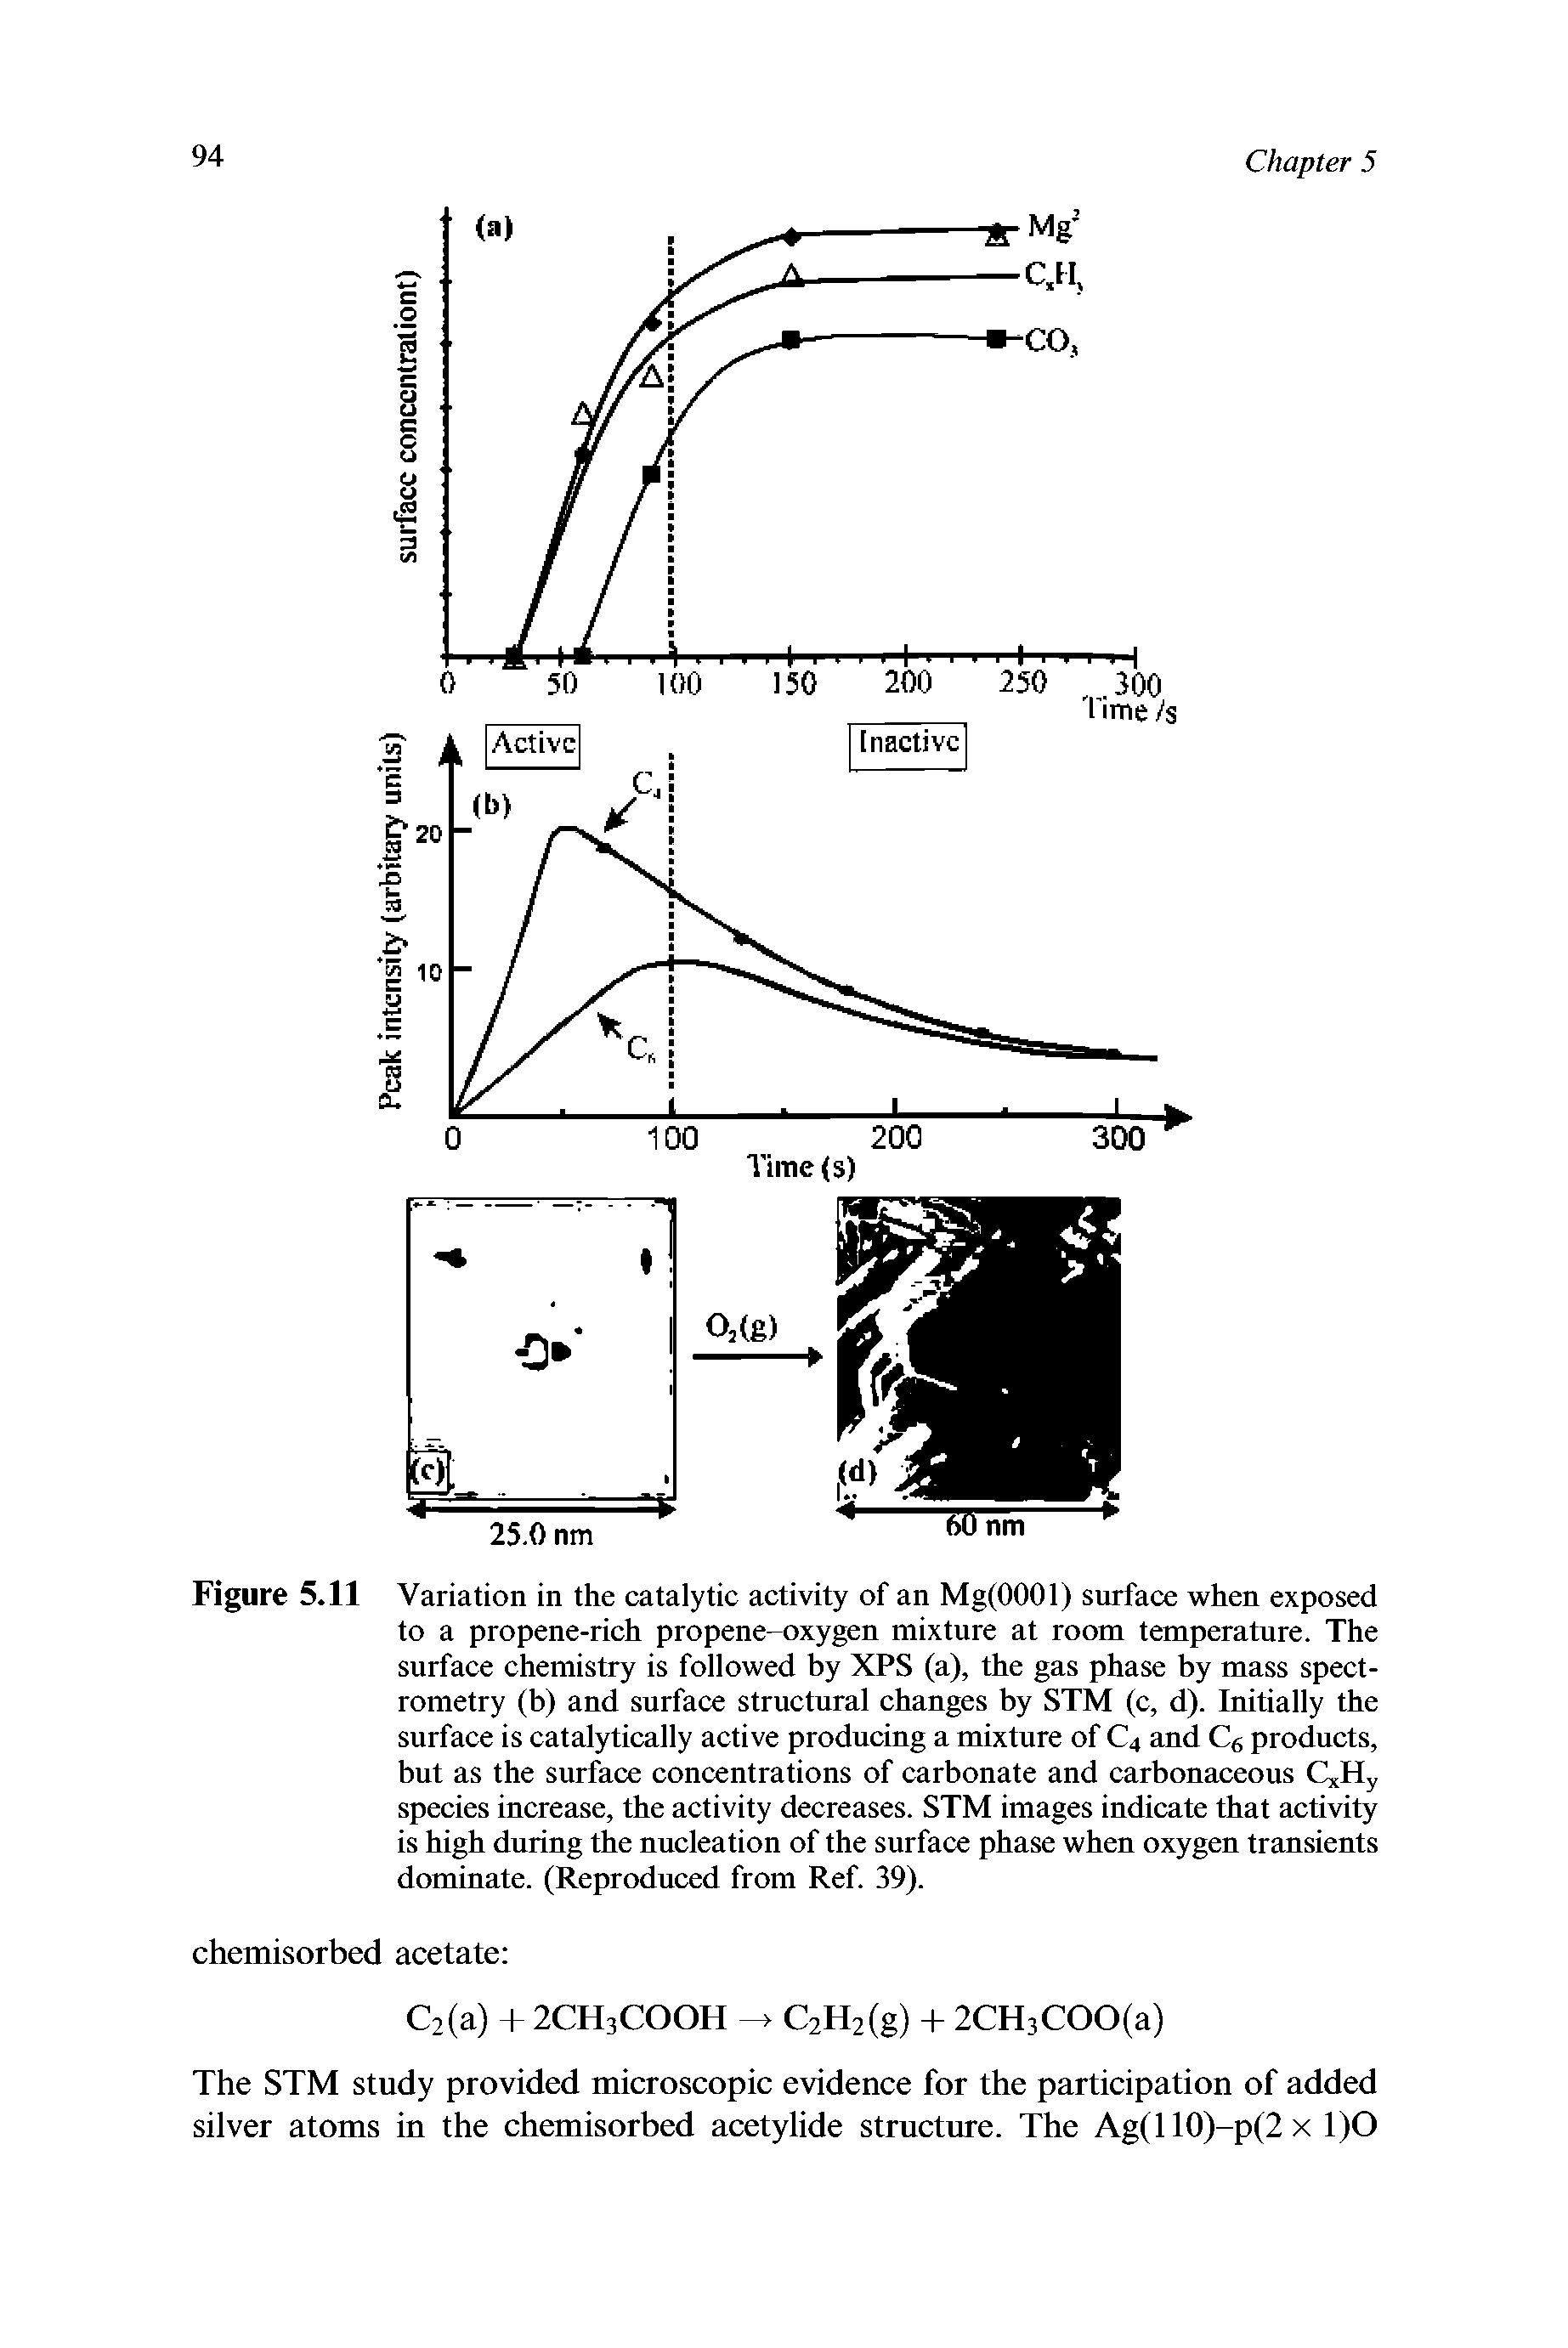 Figure 5.11 Variation in the catalytic activity of an Mg(0001) surface when exposed to a propene-rich propene- oxygen mixture at room temperature. The surface chemistry is followed by XPS (a), the gas phase by mass spectrometry (b) and surface structural changes by STM (c, d). Initially the surface is catalytically active producing a mixture of C4 and C6 products, but as the surface concentrations of carbonate and carbonaceous CxHy species increase, the activity decreases. STM images indicate that activity is high during the nucleation of the surface phase when oxygen transients dominate. (Reproduced from Ref. 39).